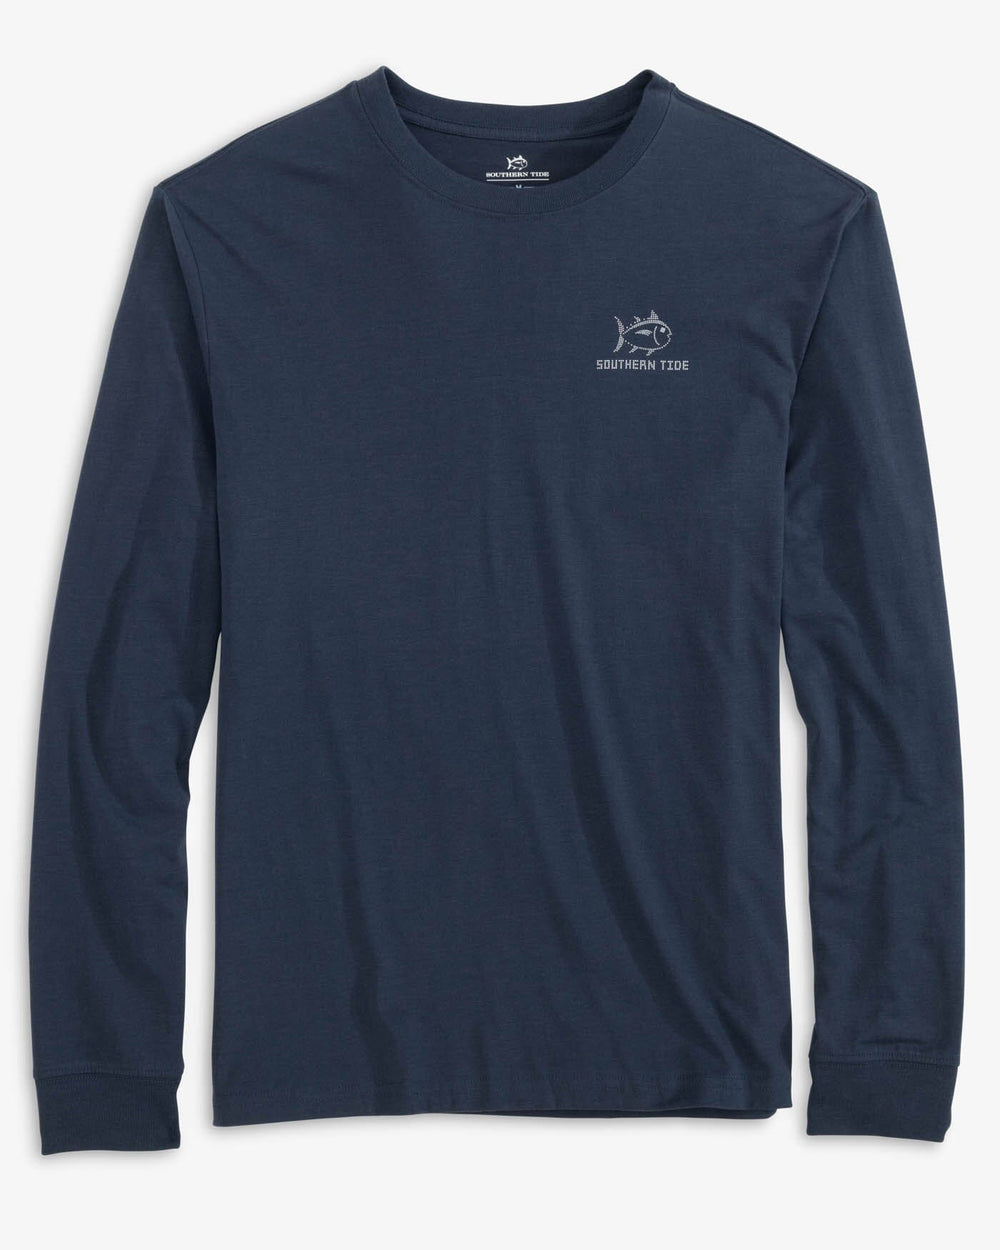 The front view of the Southern Tide Fair Isle Skipjack Long Sleeve T-shirt by Southern Tide - True Navy